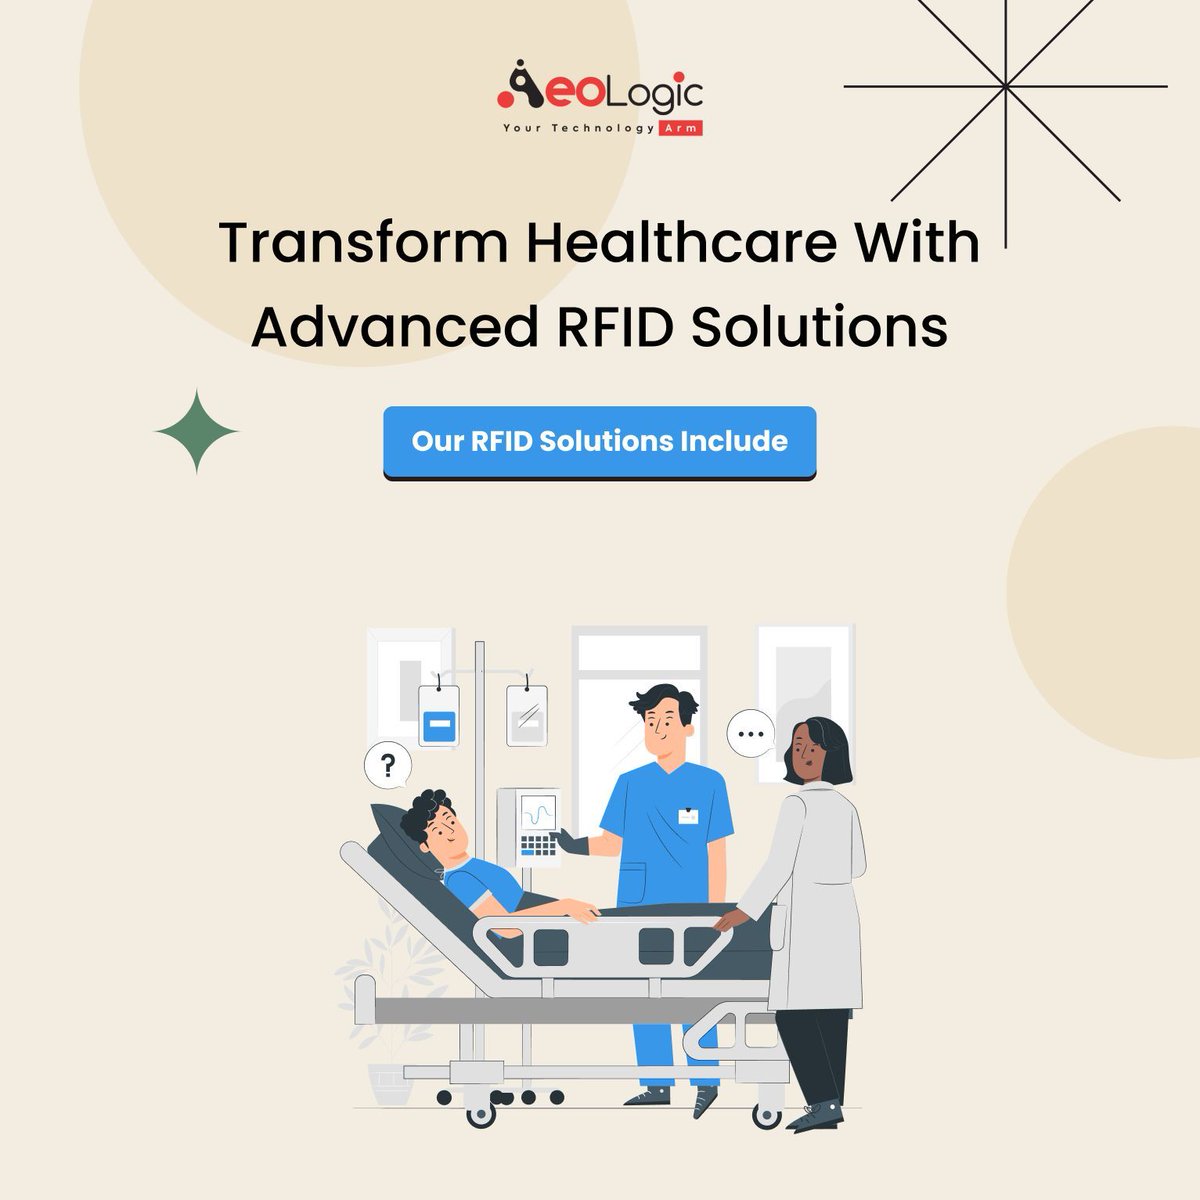 Transform Healthcare with Advanced RFID Solutions 

Contact us at 📞 +91-120-3200058 or 📧 email us at support@aeologic.com 

#RFIDSolutions #HealthcareInnovation #AeologicTechnologies #PatientSafety #AssetManagement #MedicationMonitoring #TechInHealthcare #DigitalTransformation